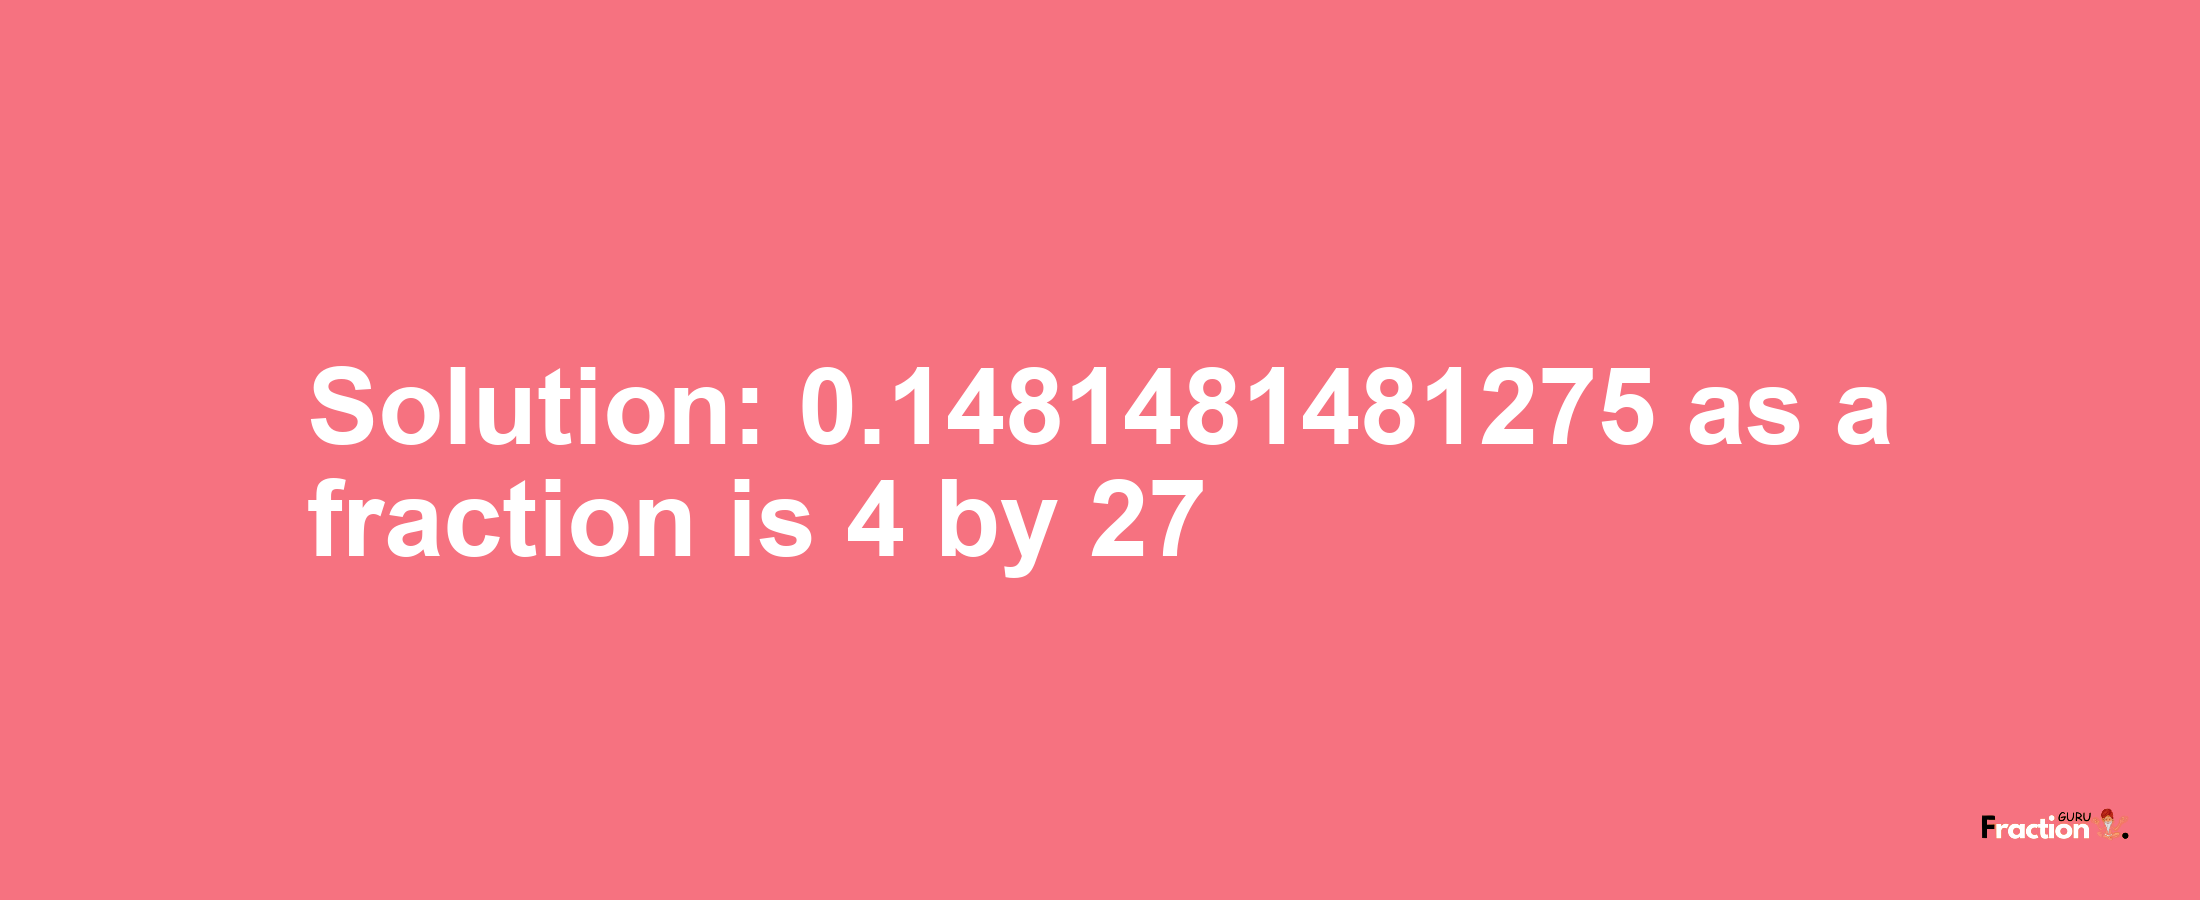 Solution:0.1481481481275 as a fraction is 4/27